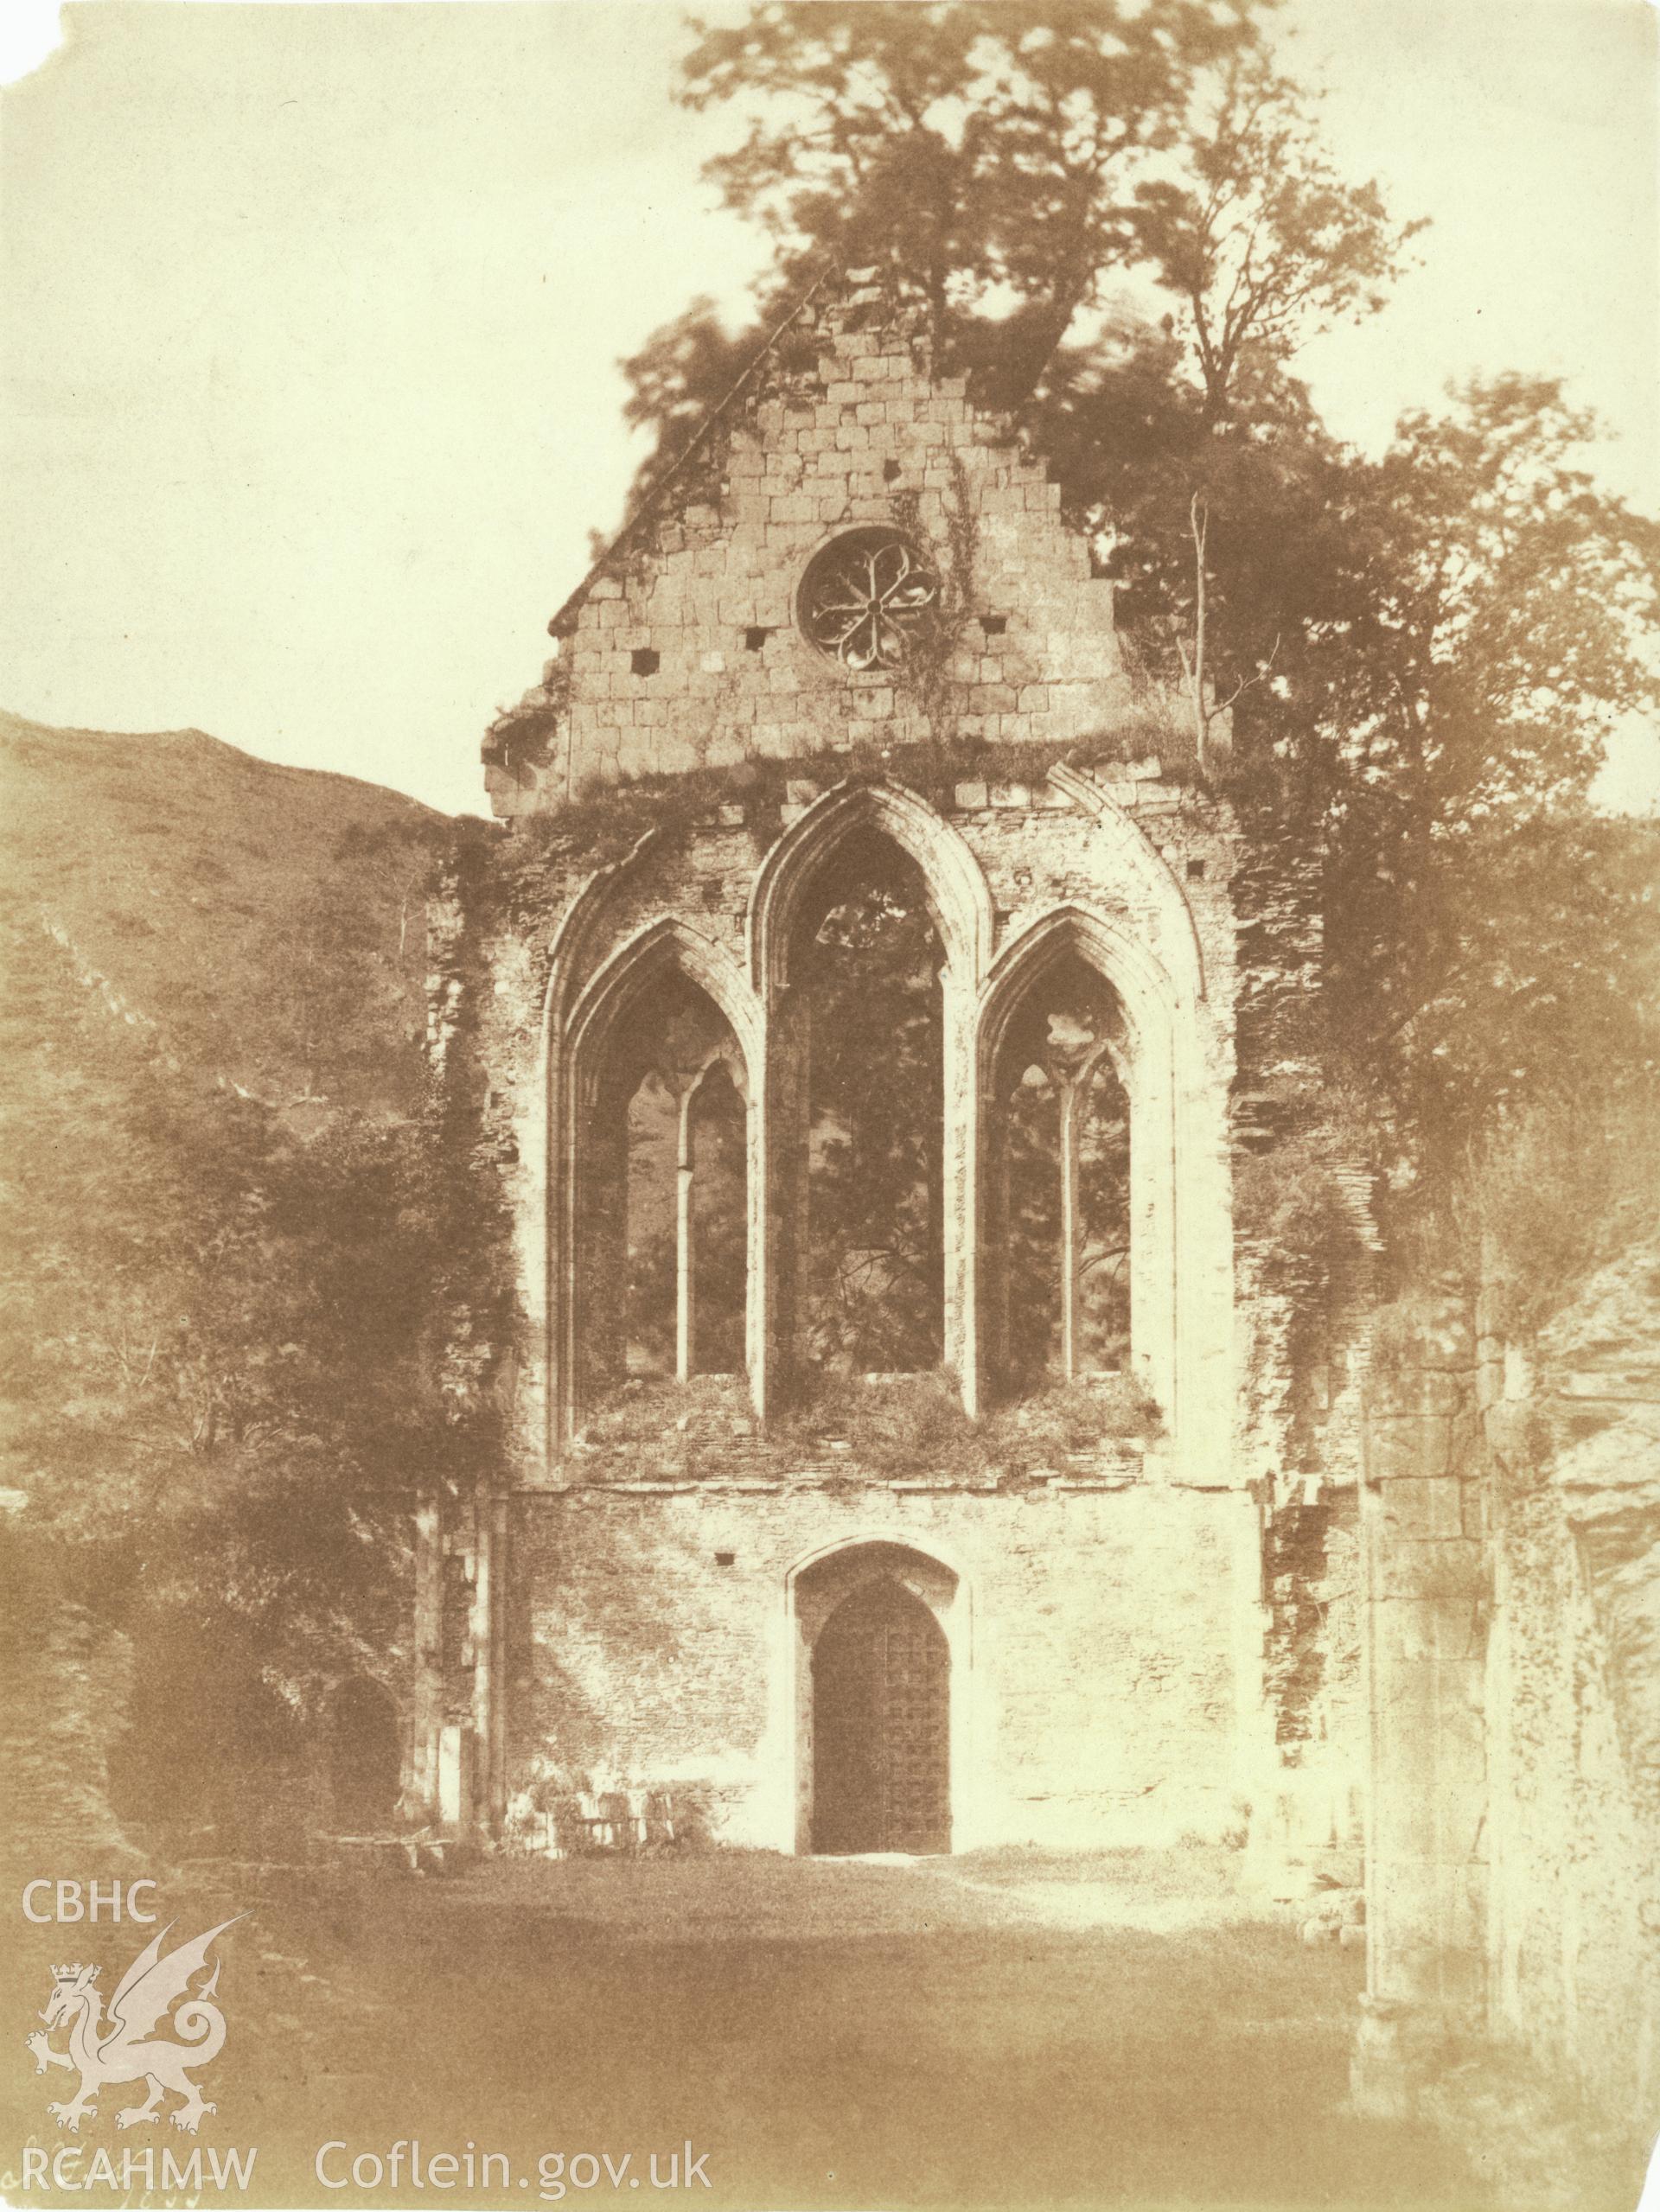 View of Valle Crucis Abbey